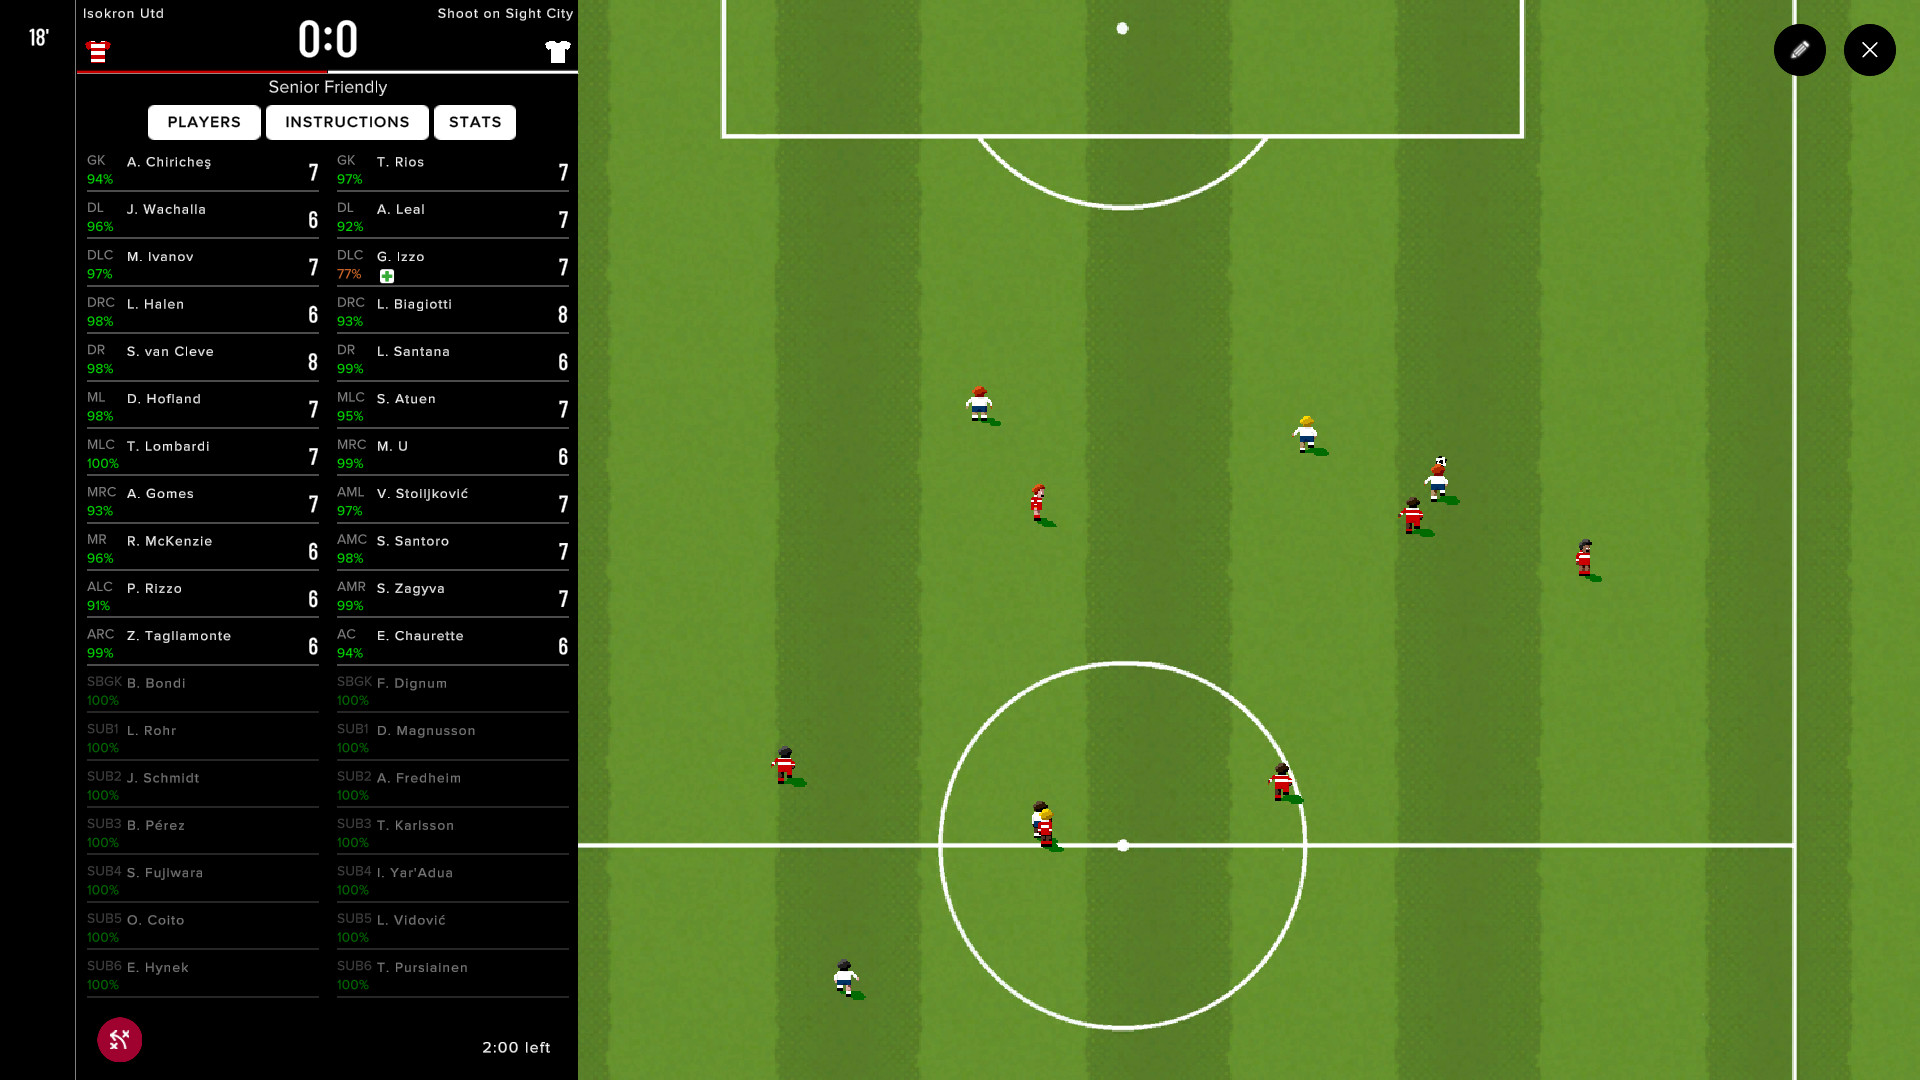 90 Minute Fever - Online Football (Soccer) Manager instal the new for ios